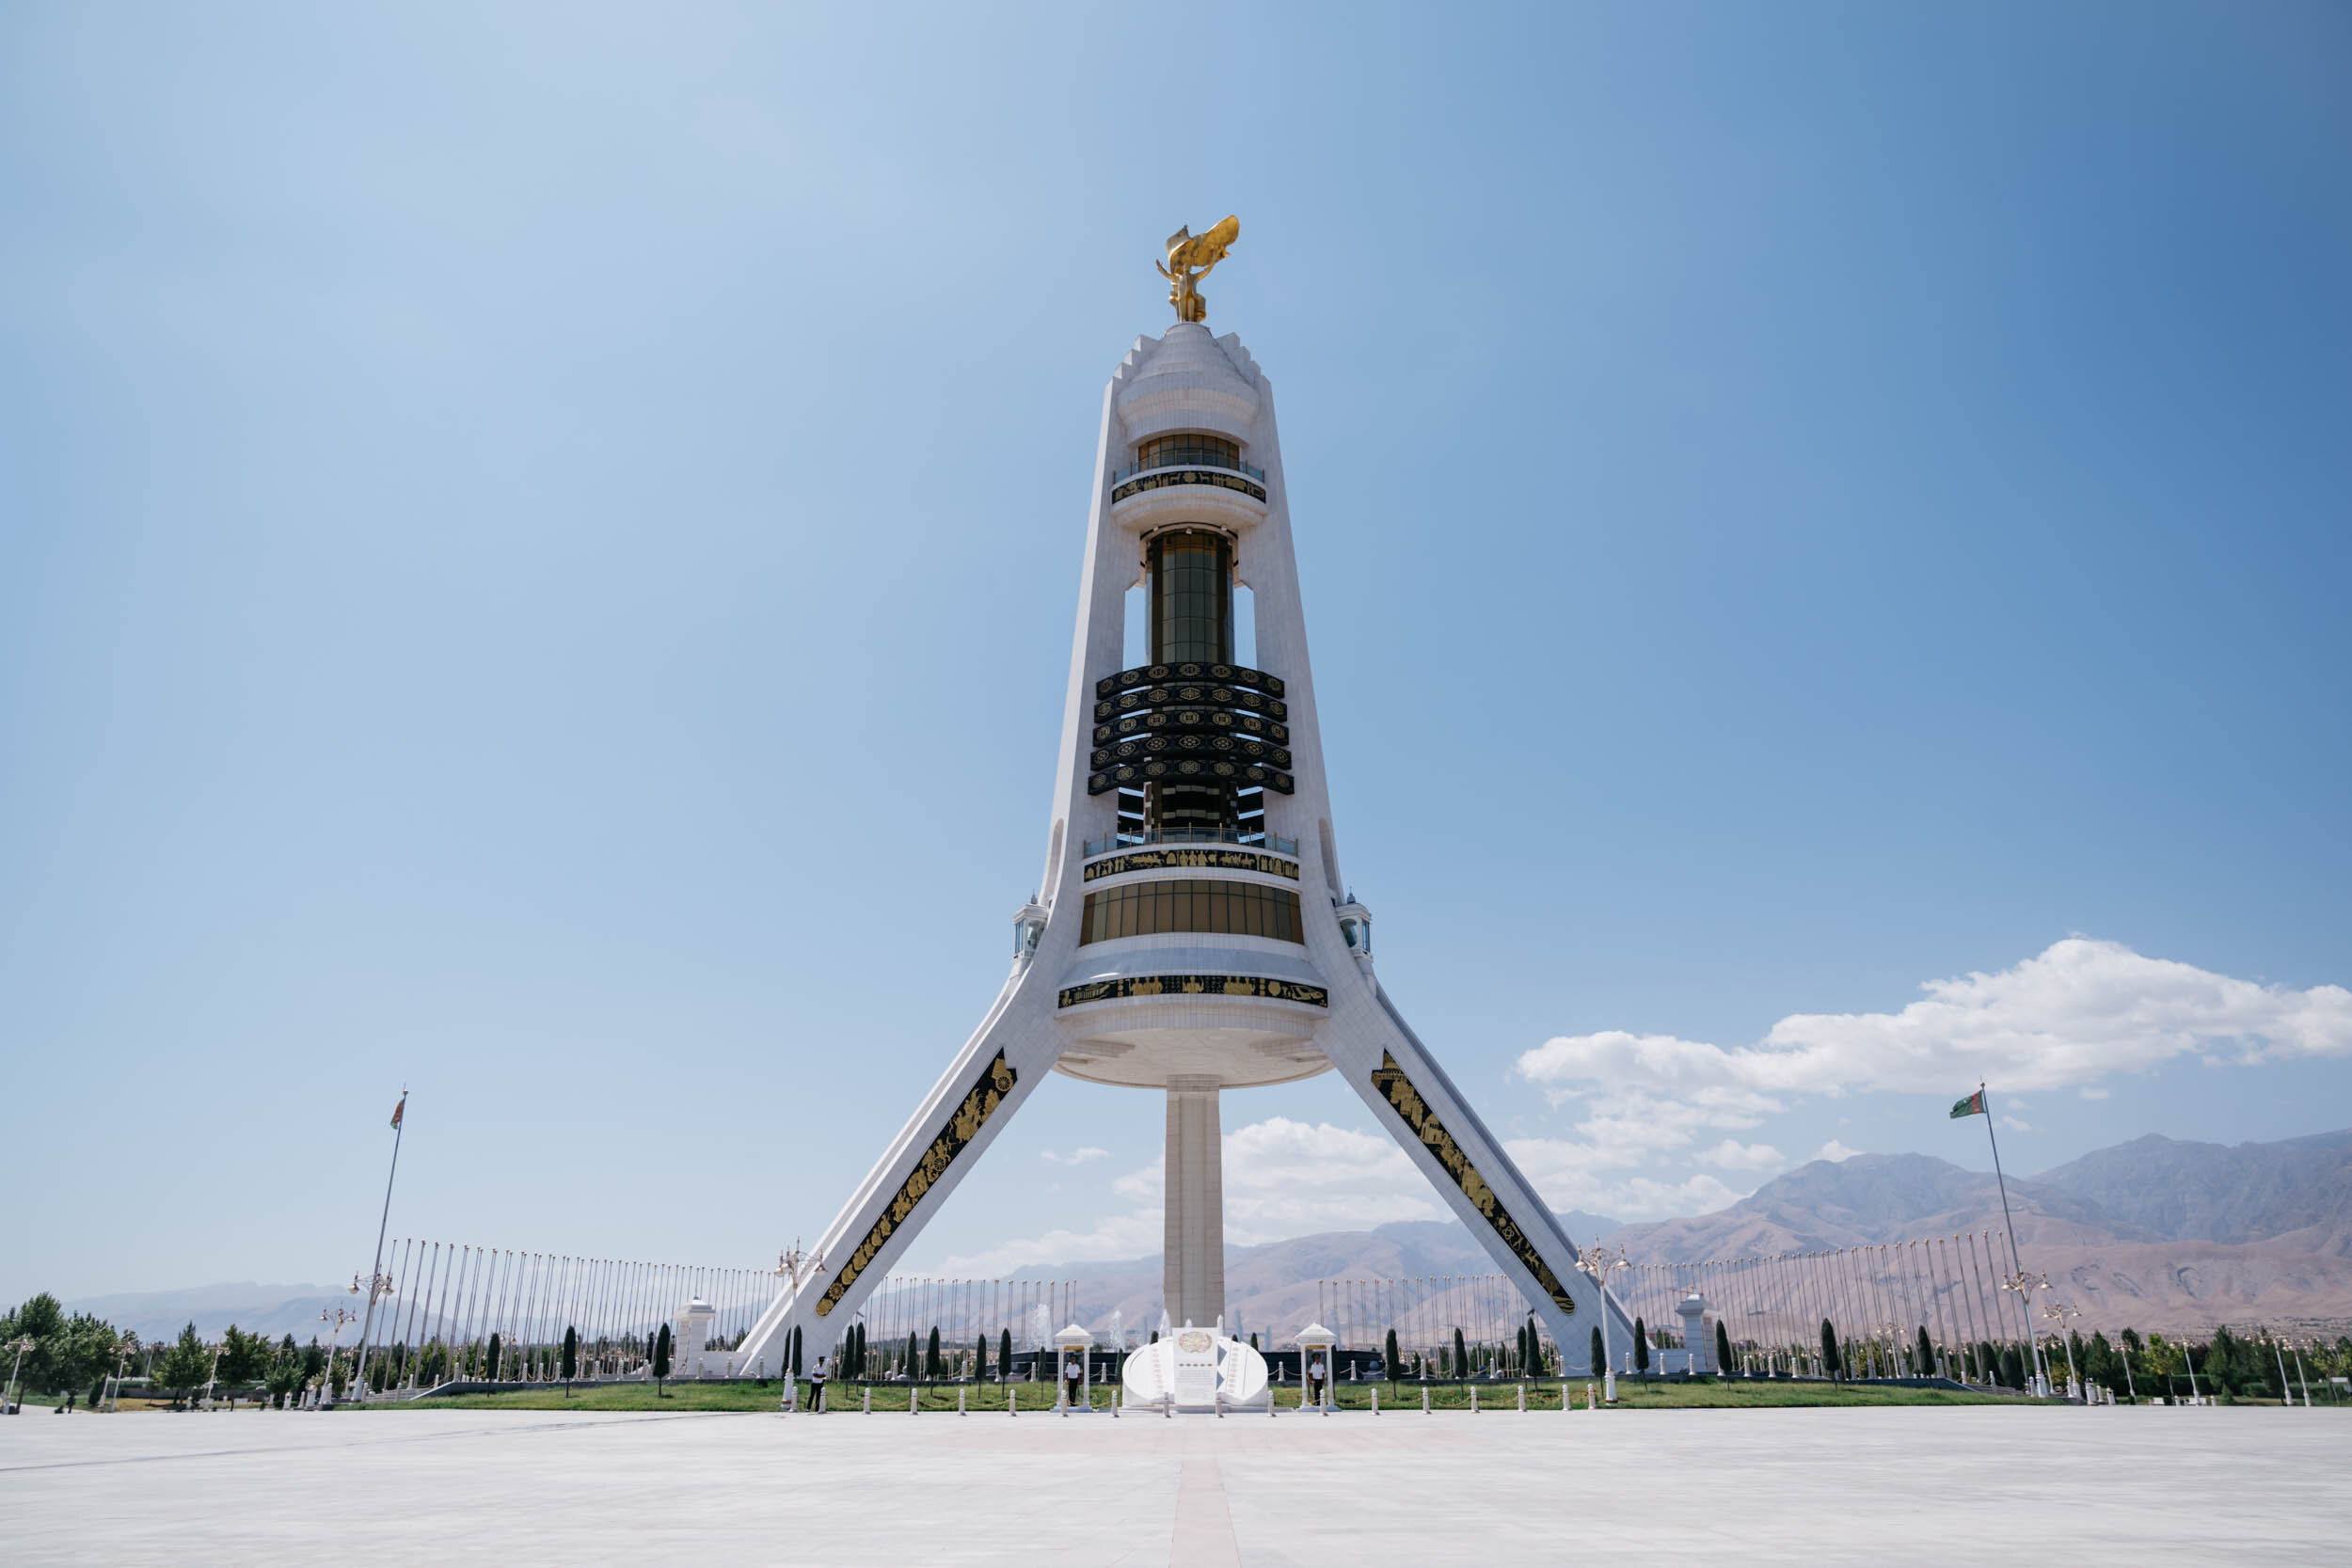  Monument to Neutrality. The monument is topped by a 12-metre tall gold-plated statue of Turkmenistan's first President Saparmurat Niyazov which rotates to always face the sun. 